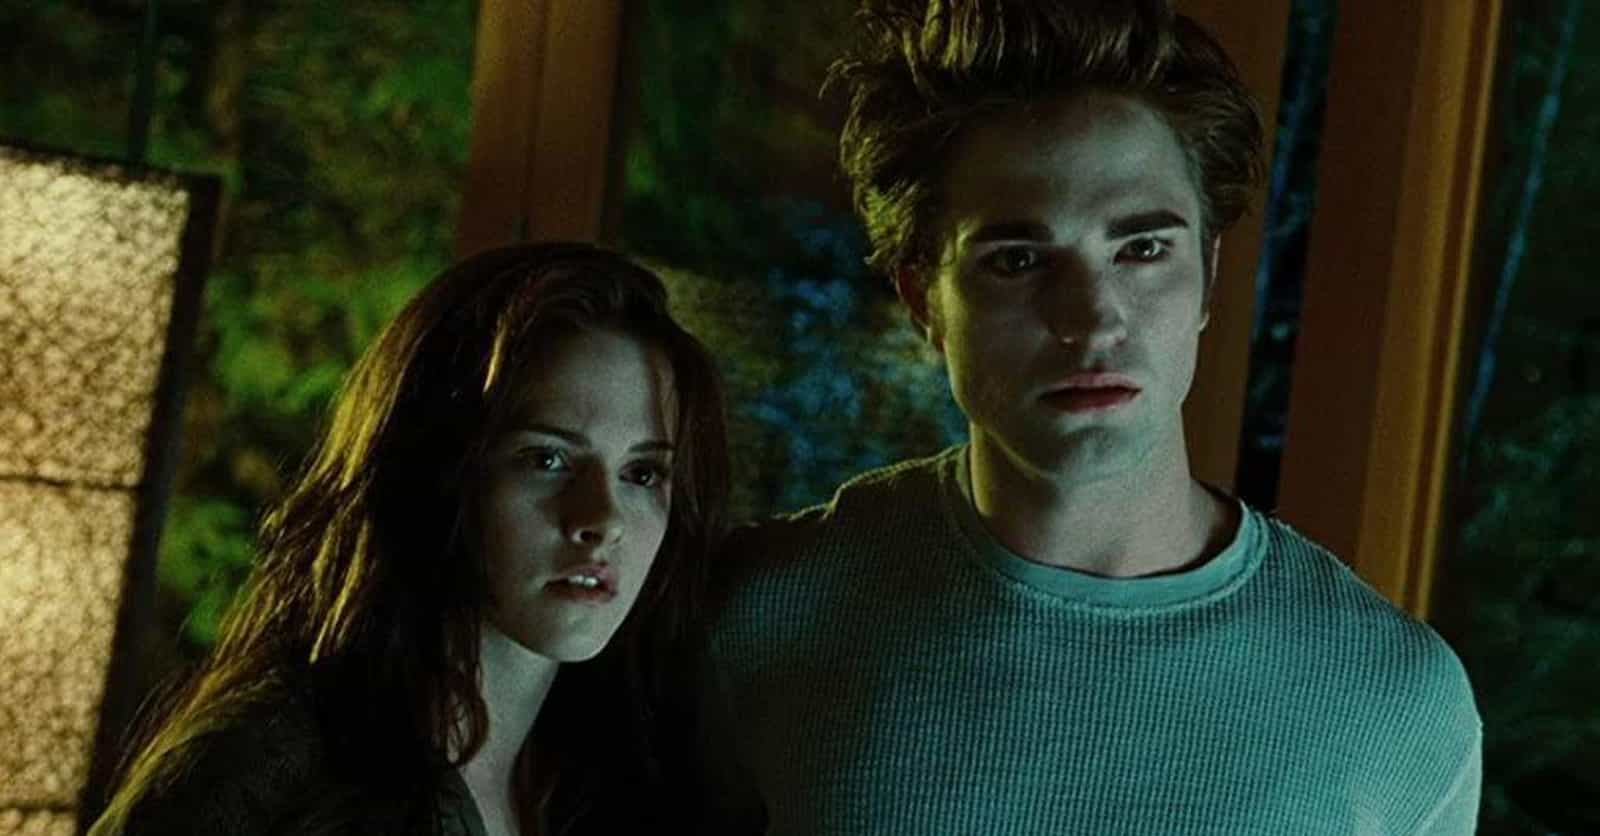 15 Fan Theories About Vampires From Your Favorite Movies And TV Shows